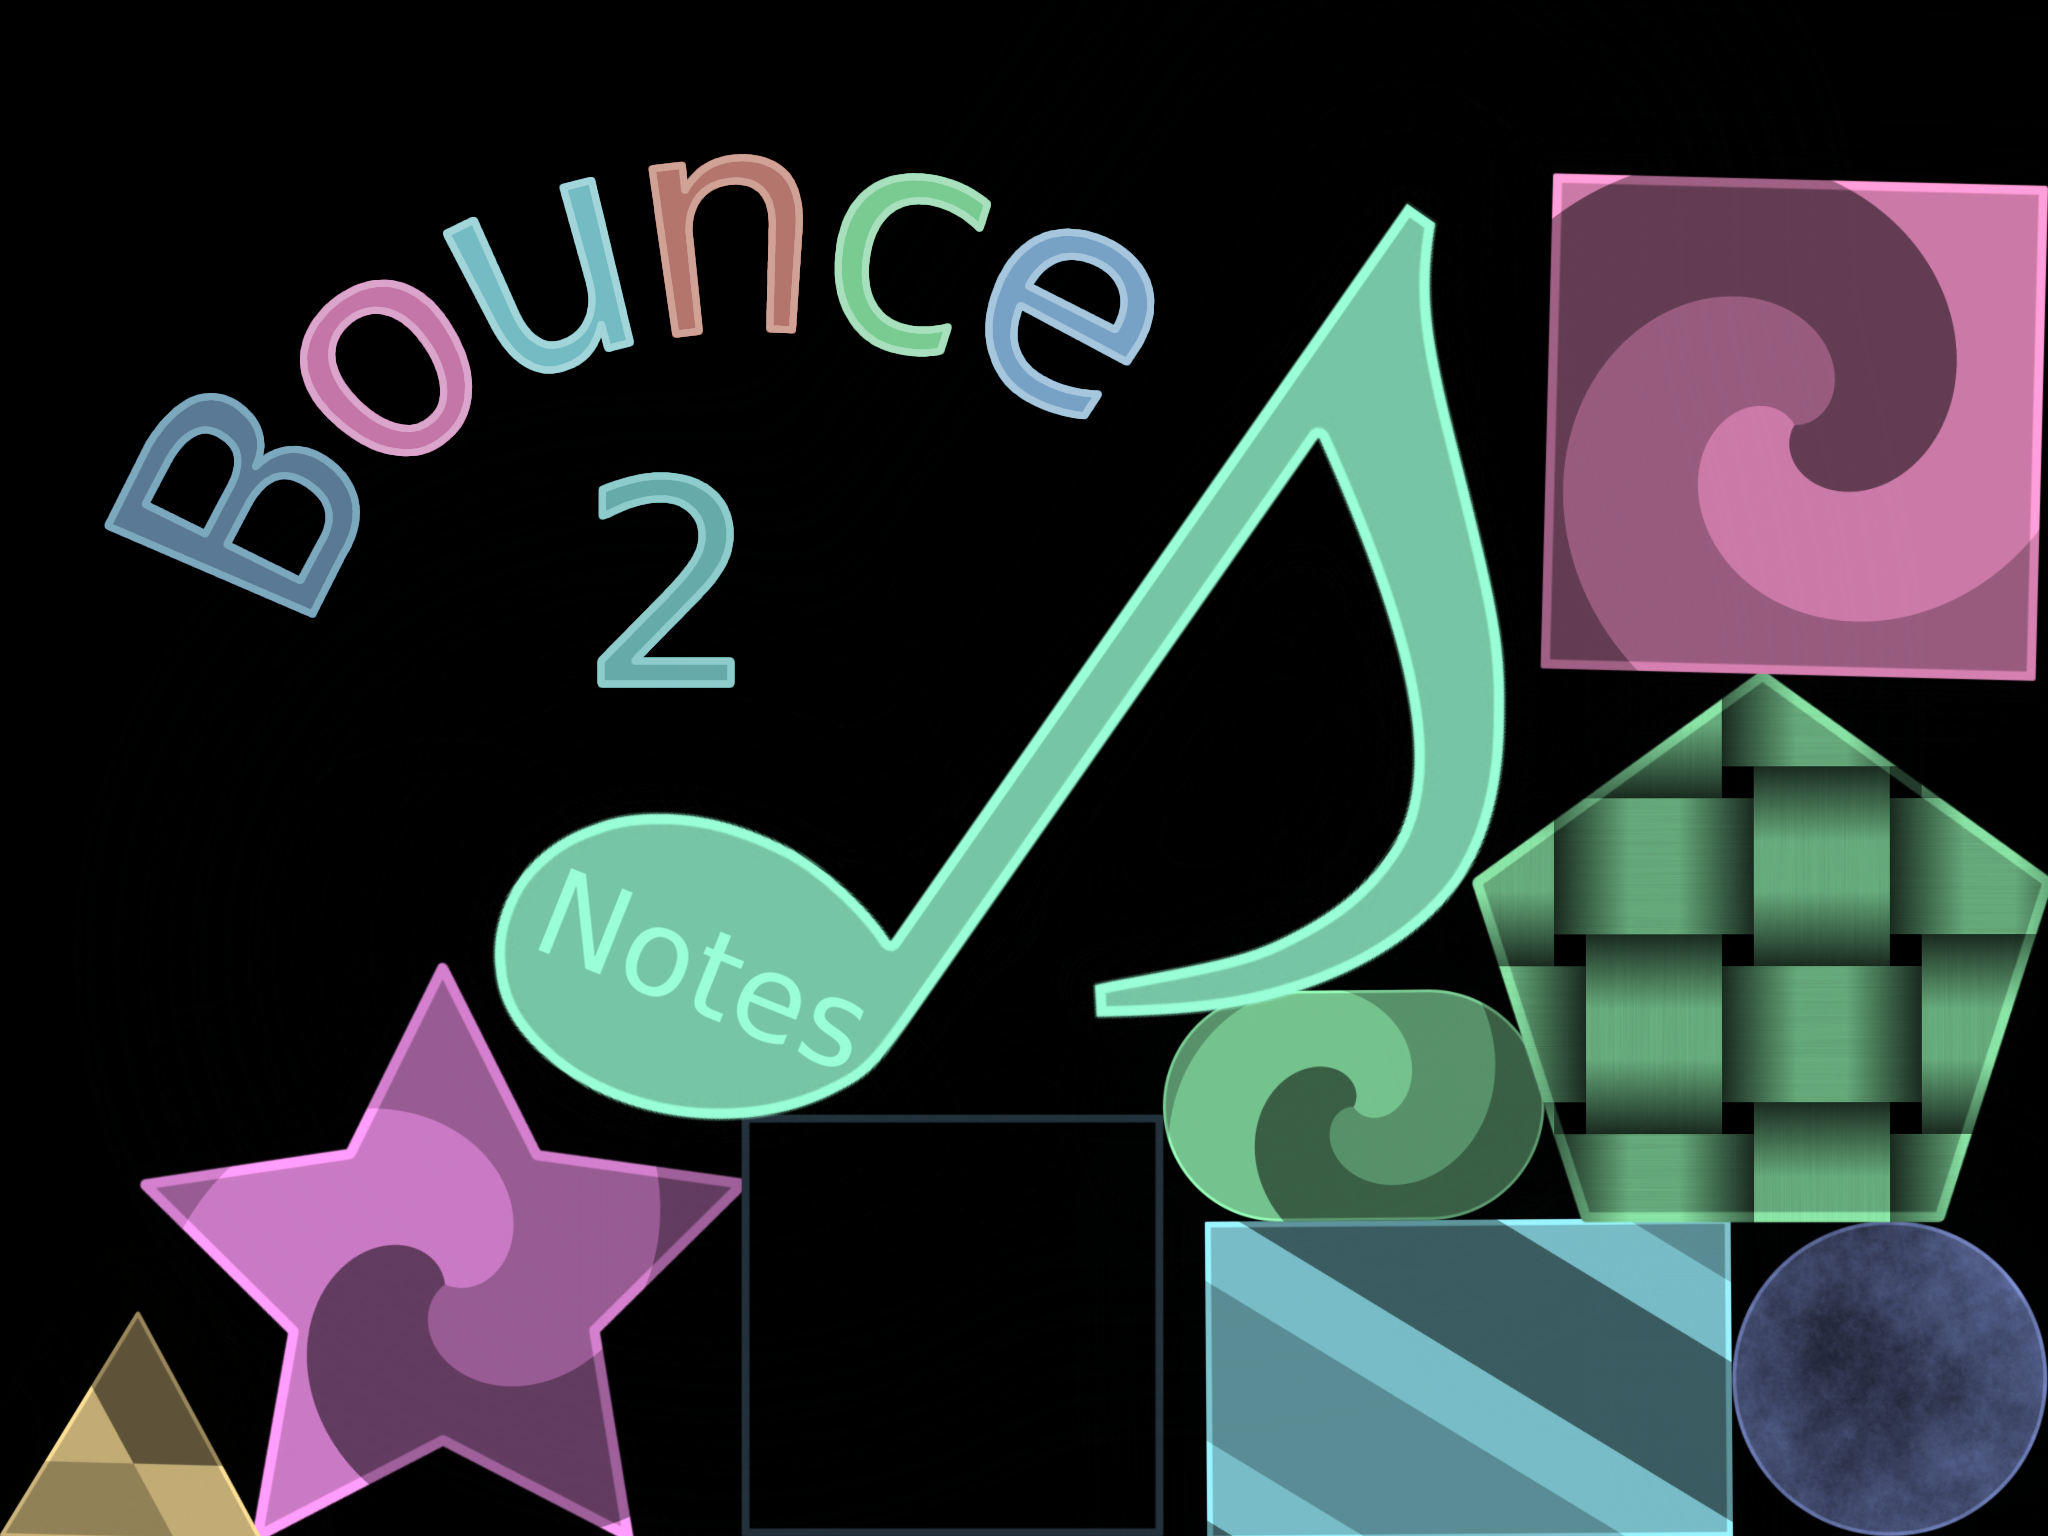 Bounce 2: Notes